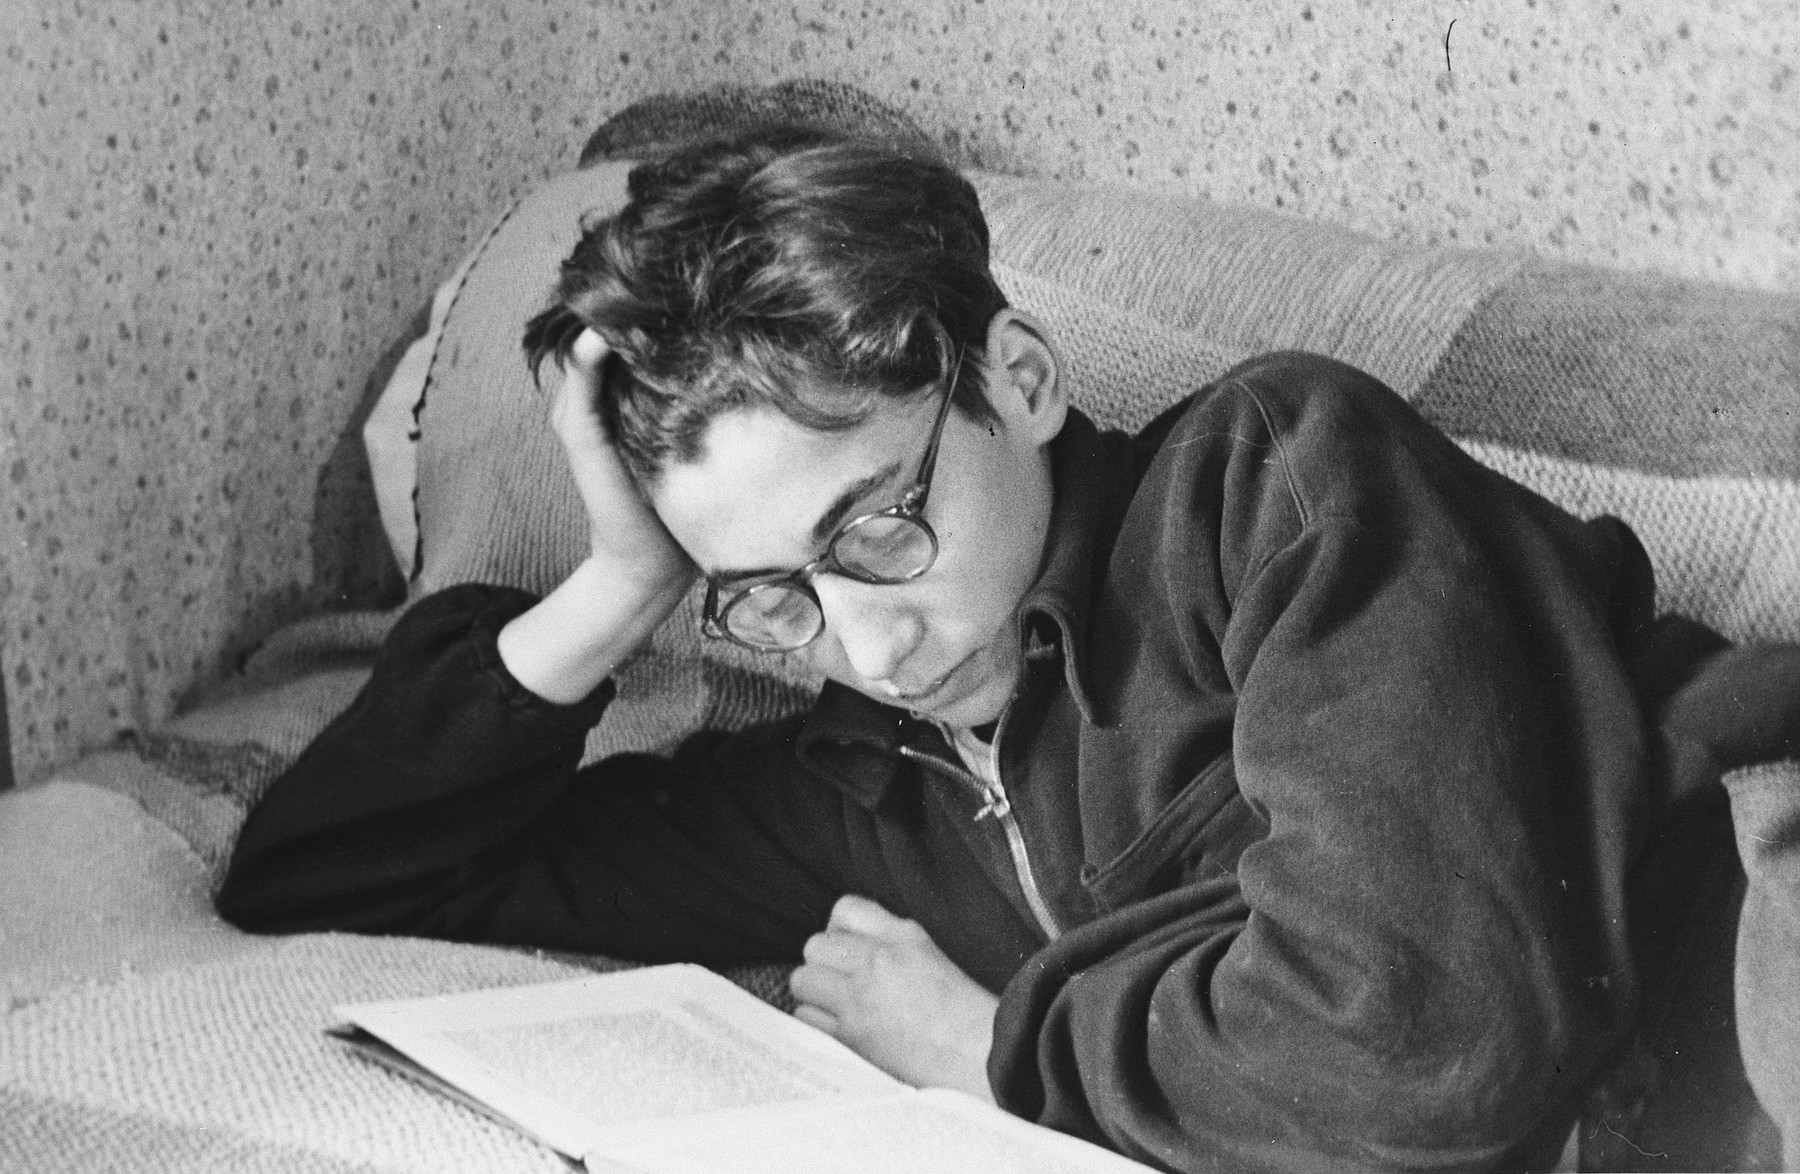 Close-up portrait of a teenage boy reading a book on his bed in a boarding school in Switzerland.

Pictured is a Hungarian survivor, Steven Polgar, the donor's roommmate.